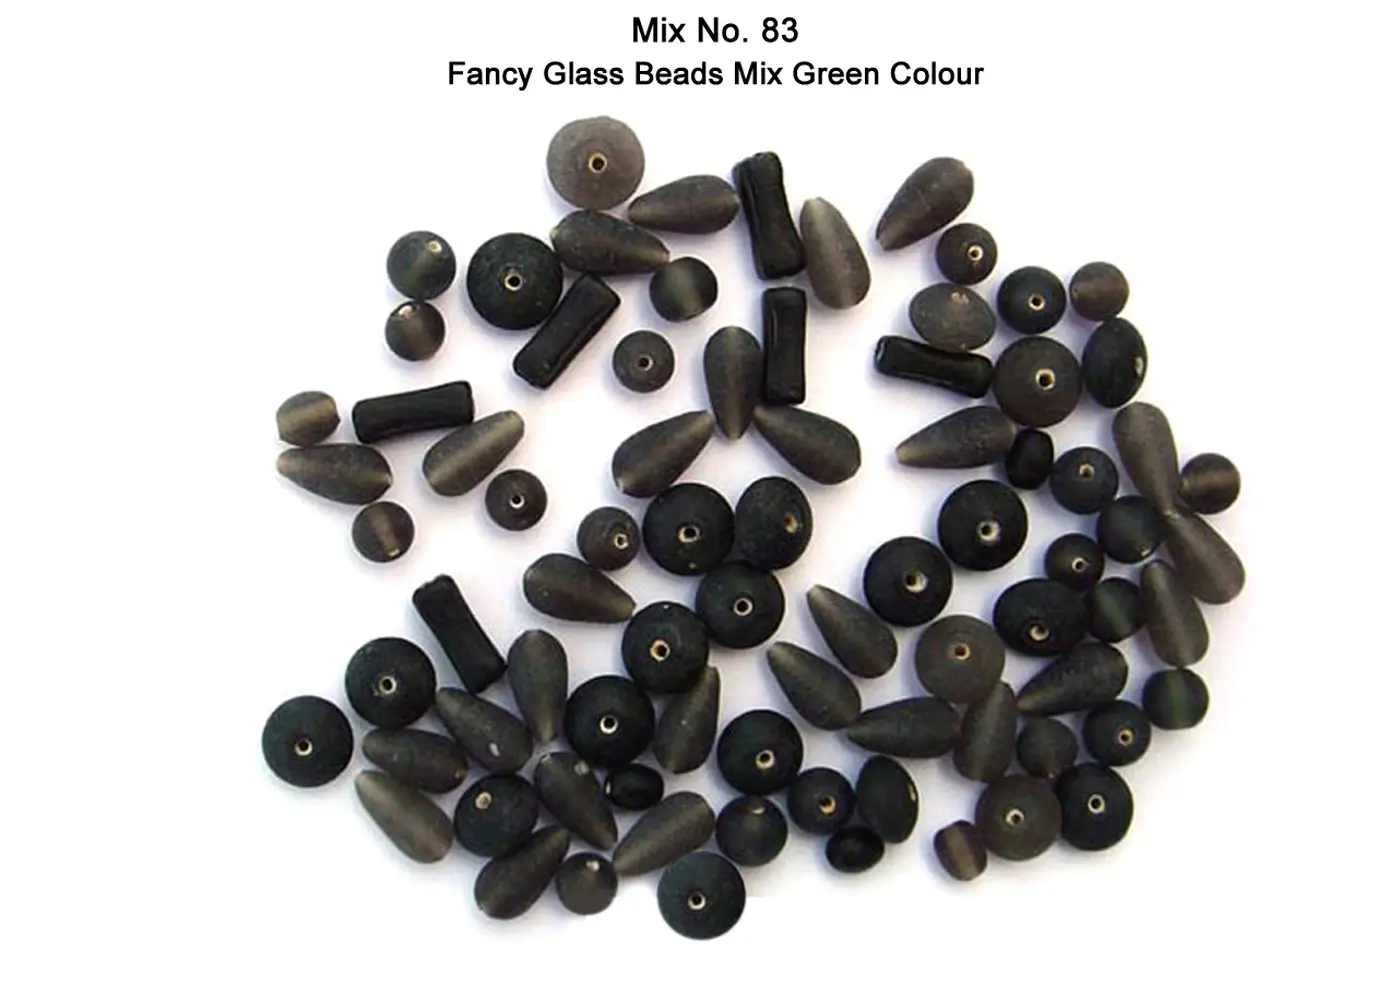 Frosted Plain beads in Black color